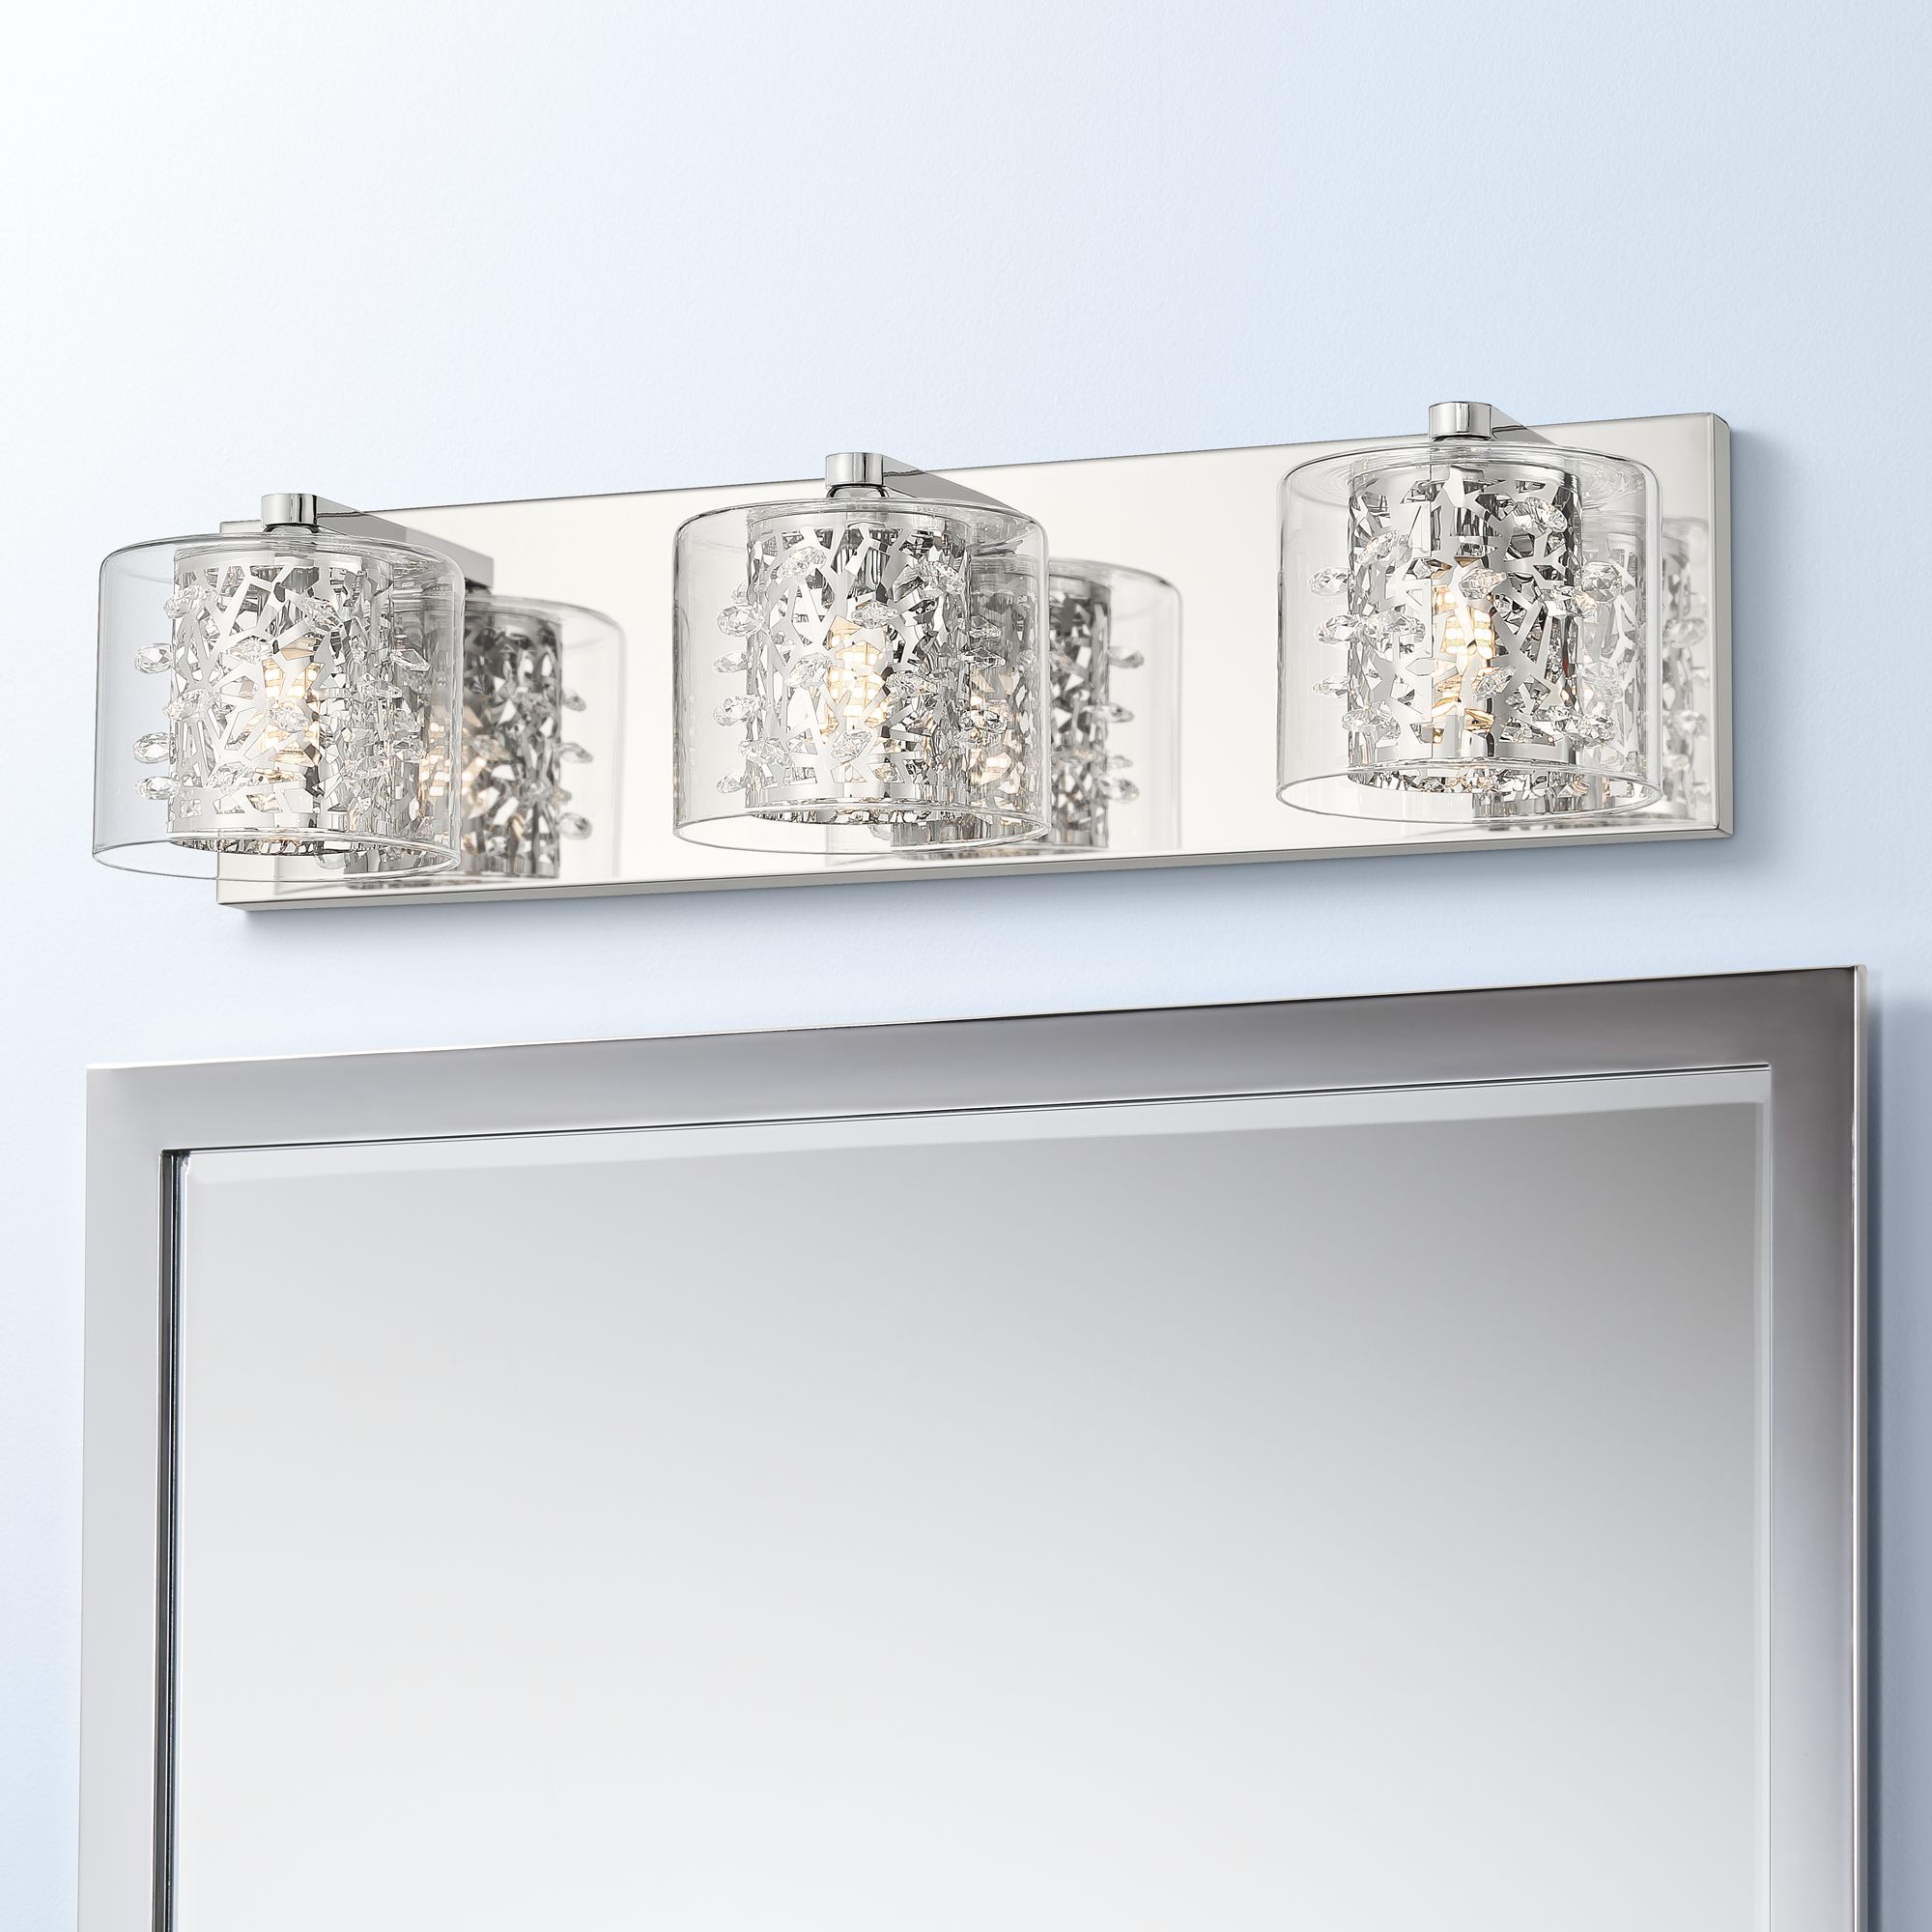 2021 Clear Wall Mirrors Within Possini Euro Design Modern Wall Light Led Chrome Hardwired 20 1/2" Wide (View 1 of 15)